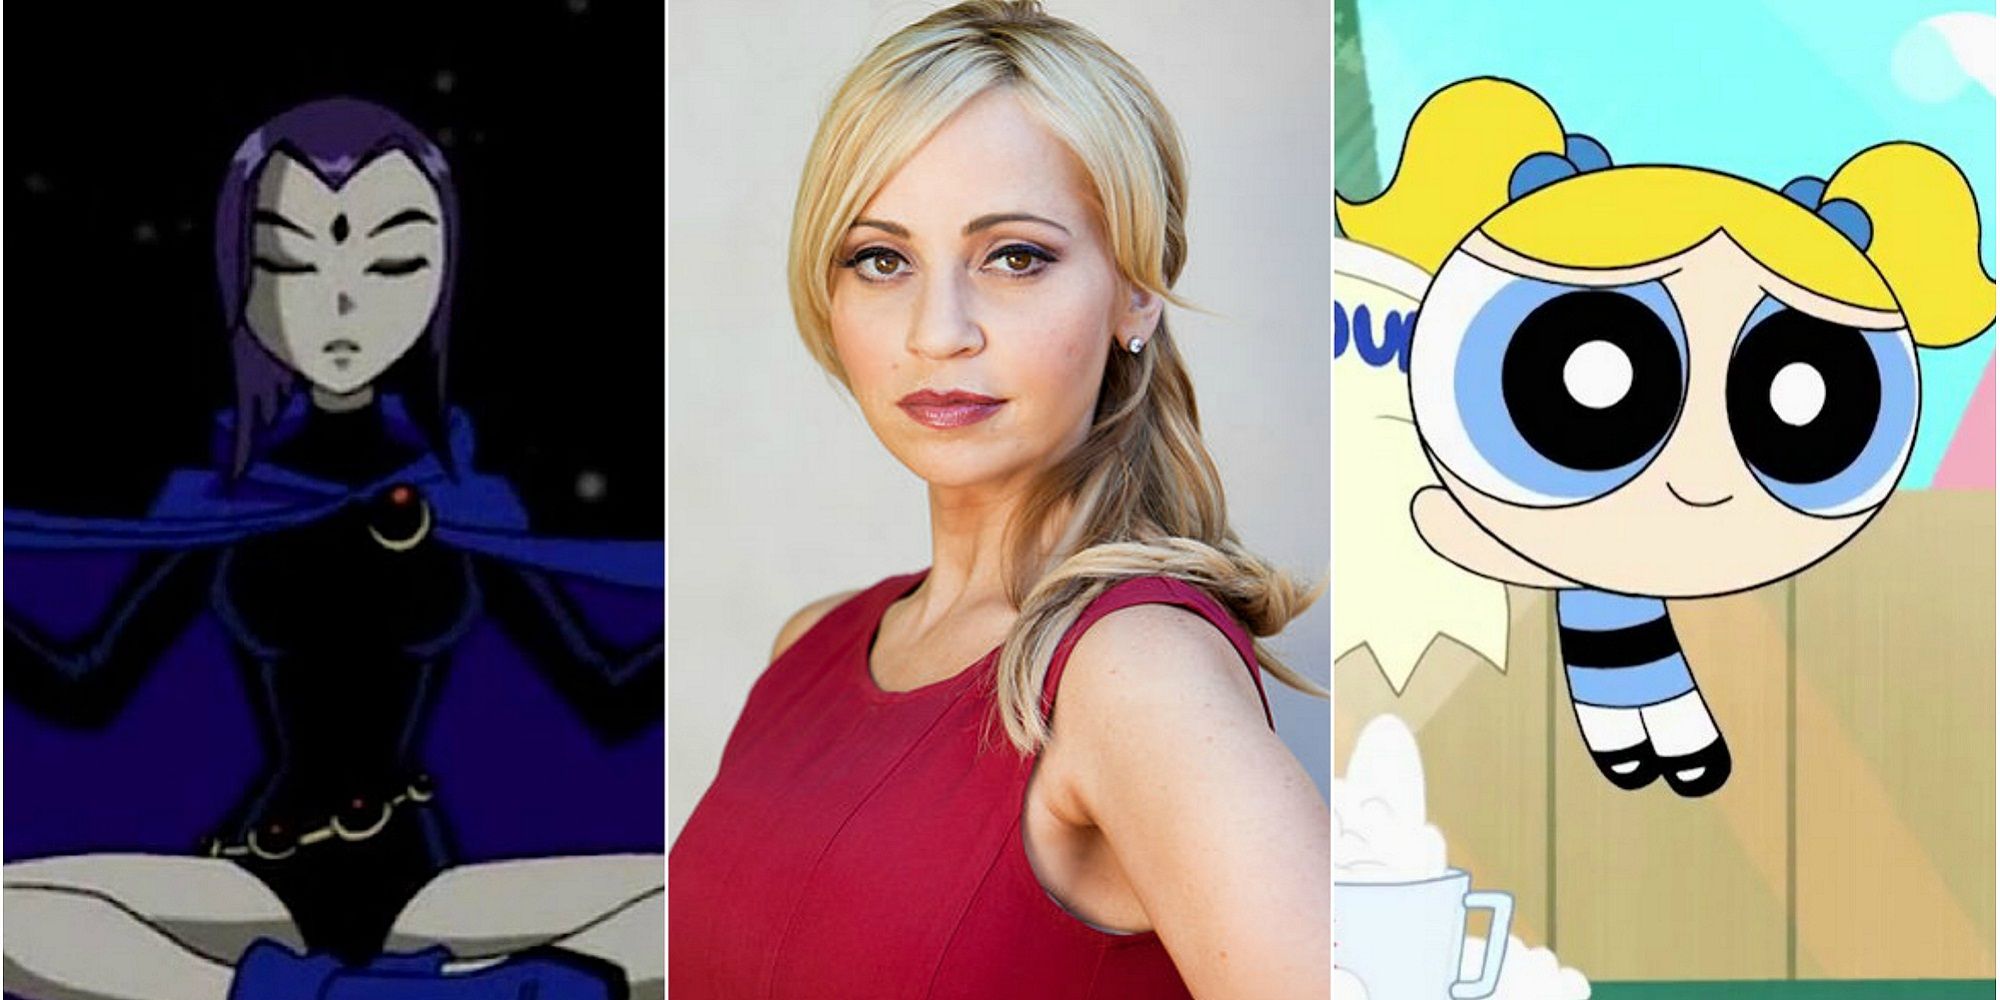 Voice actor Tara Strong as both Raven from Teen Titans Go! and Bubbles from The Power Puff Girls